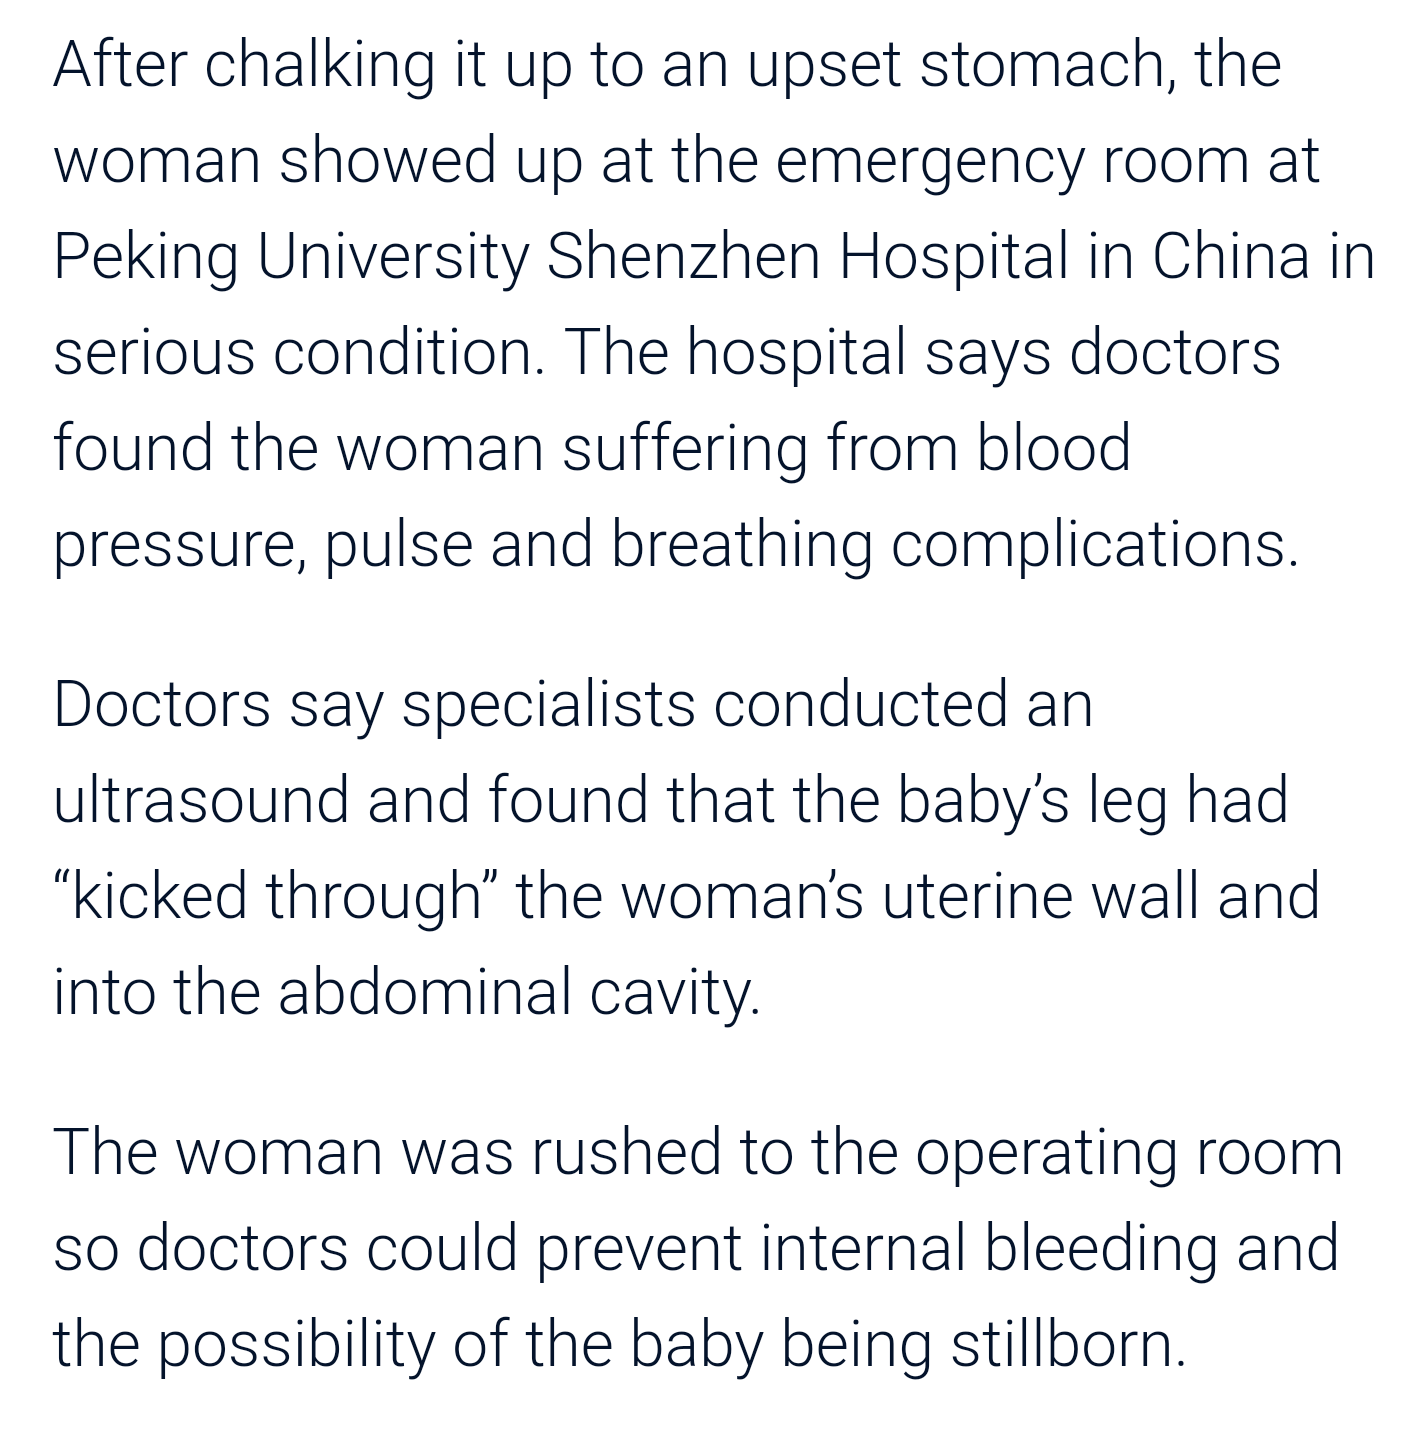 The Shocking Story Of A Mother With A Hole In Her Womb Will Make You Have Stomach Pain